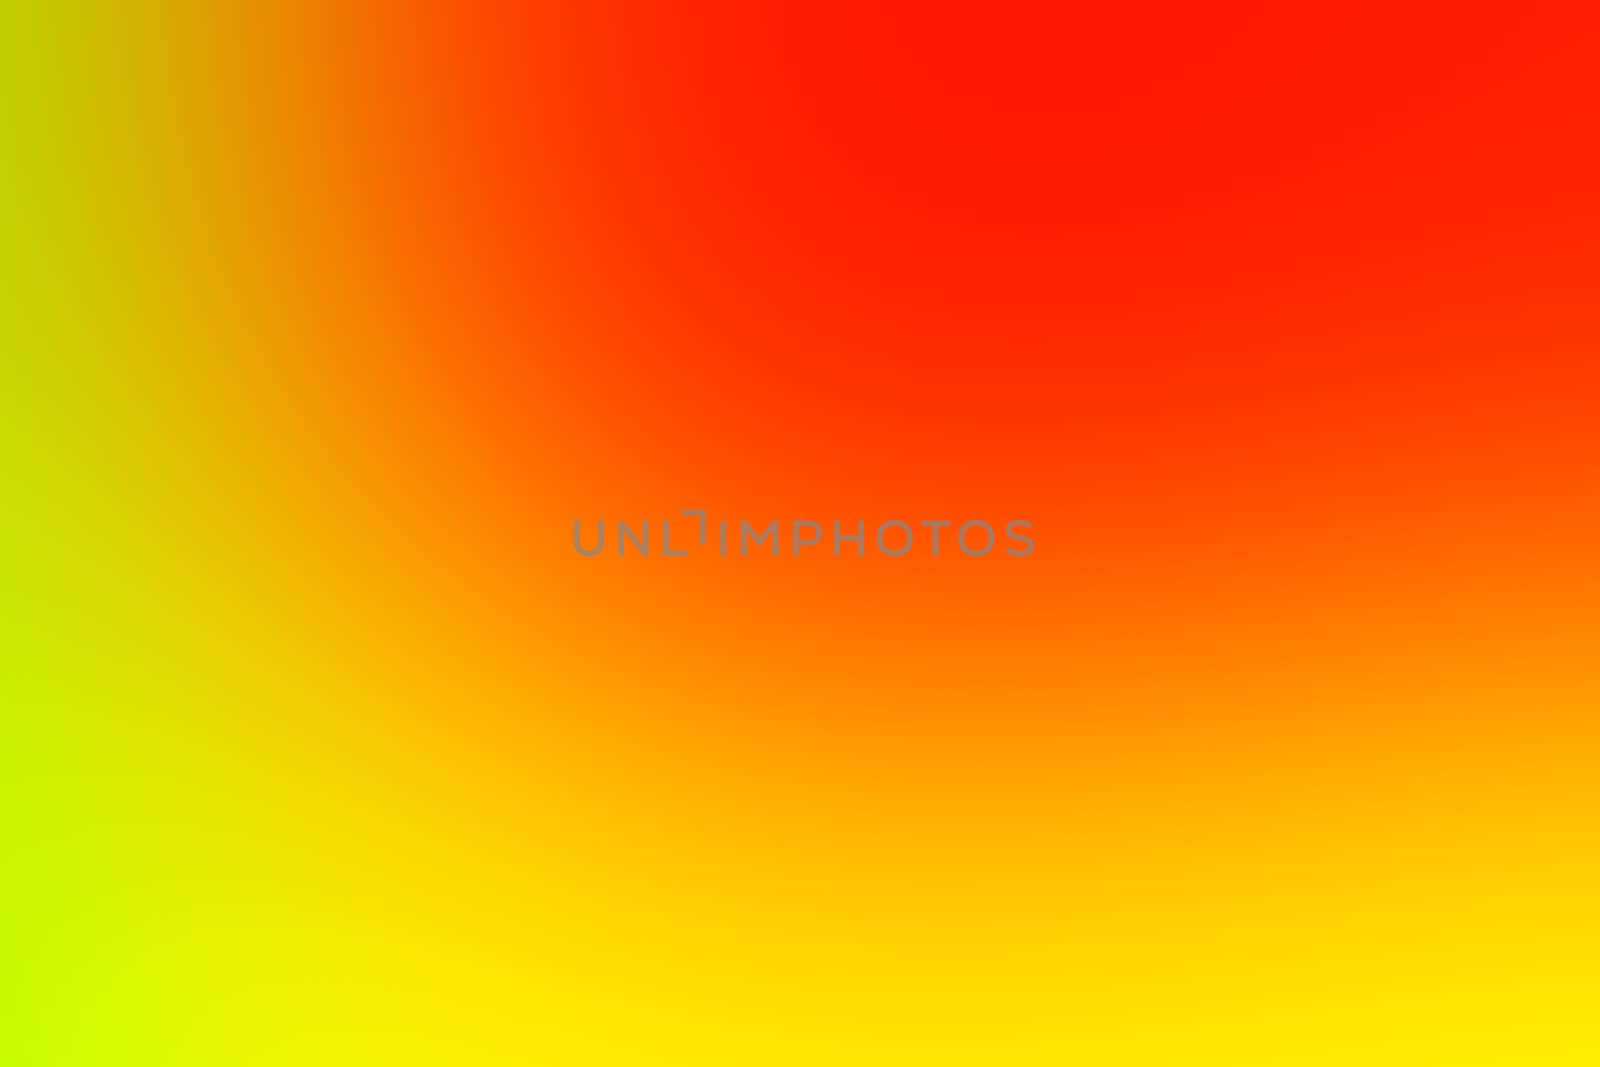 blurred soft red and yellow gradient colorful light shade background